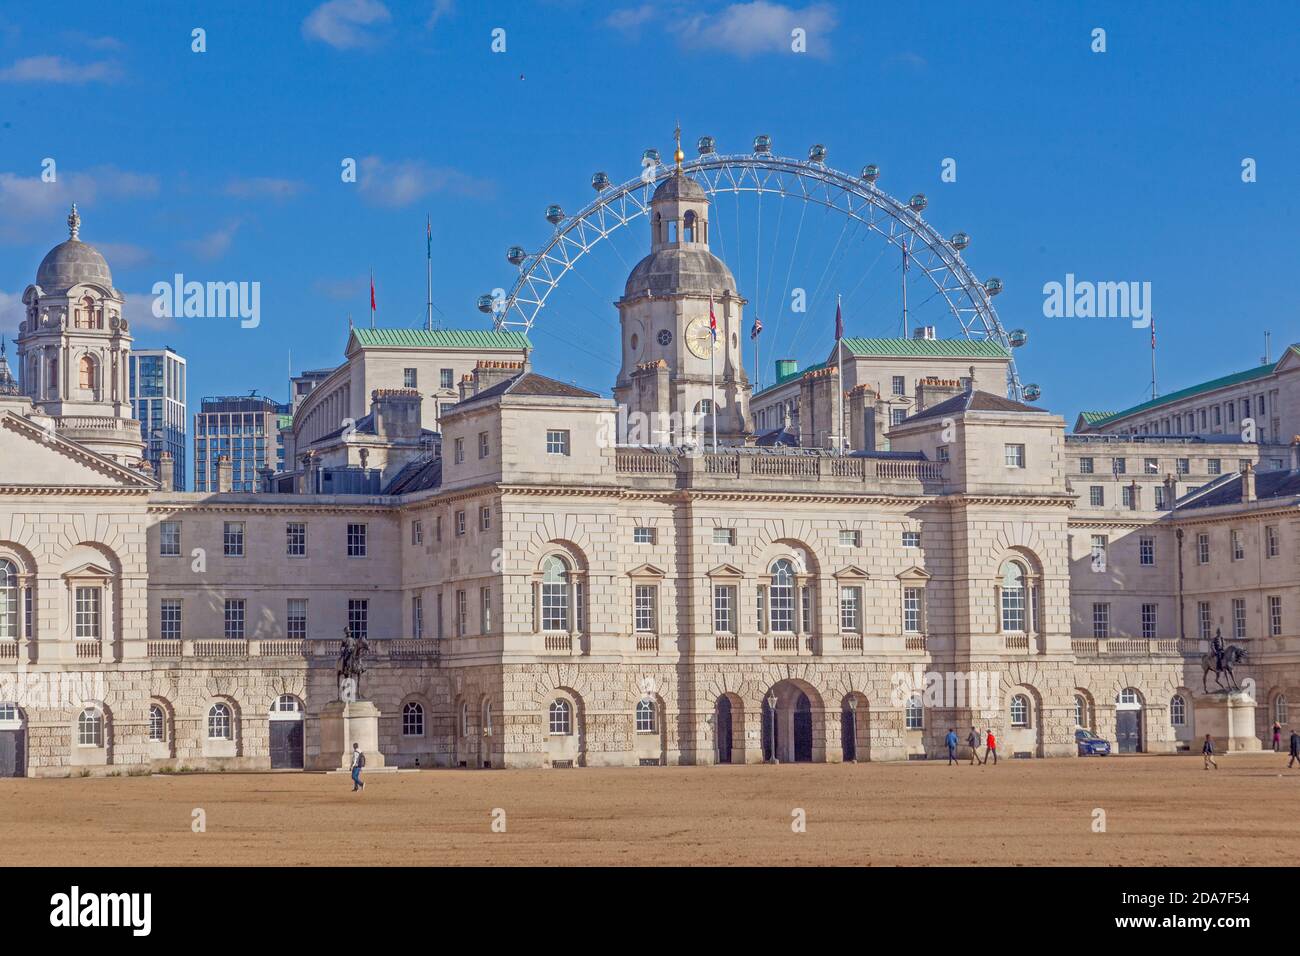 London, Westminster. Horse Guards Parade, showing the ceremonial parade ground, and William Kent's 18th century buildings on Whitehall. Stock Photo